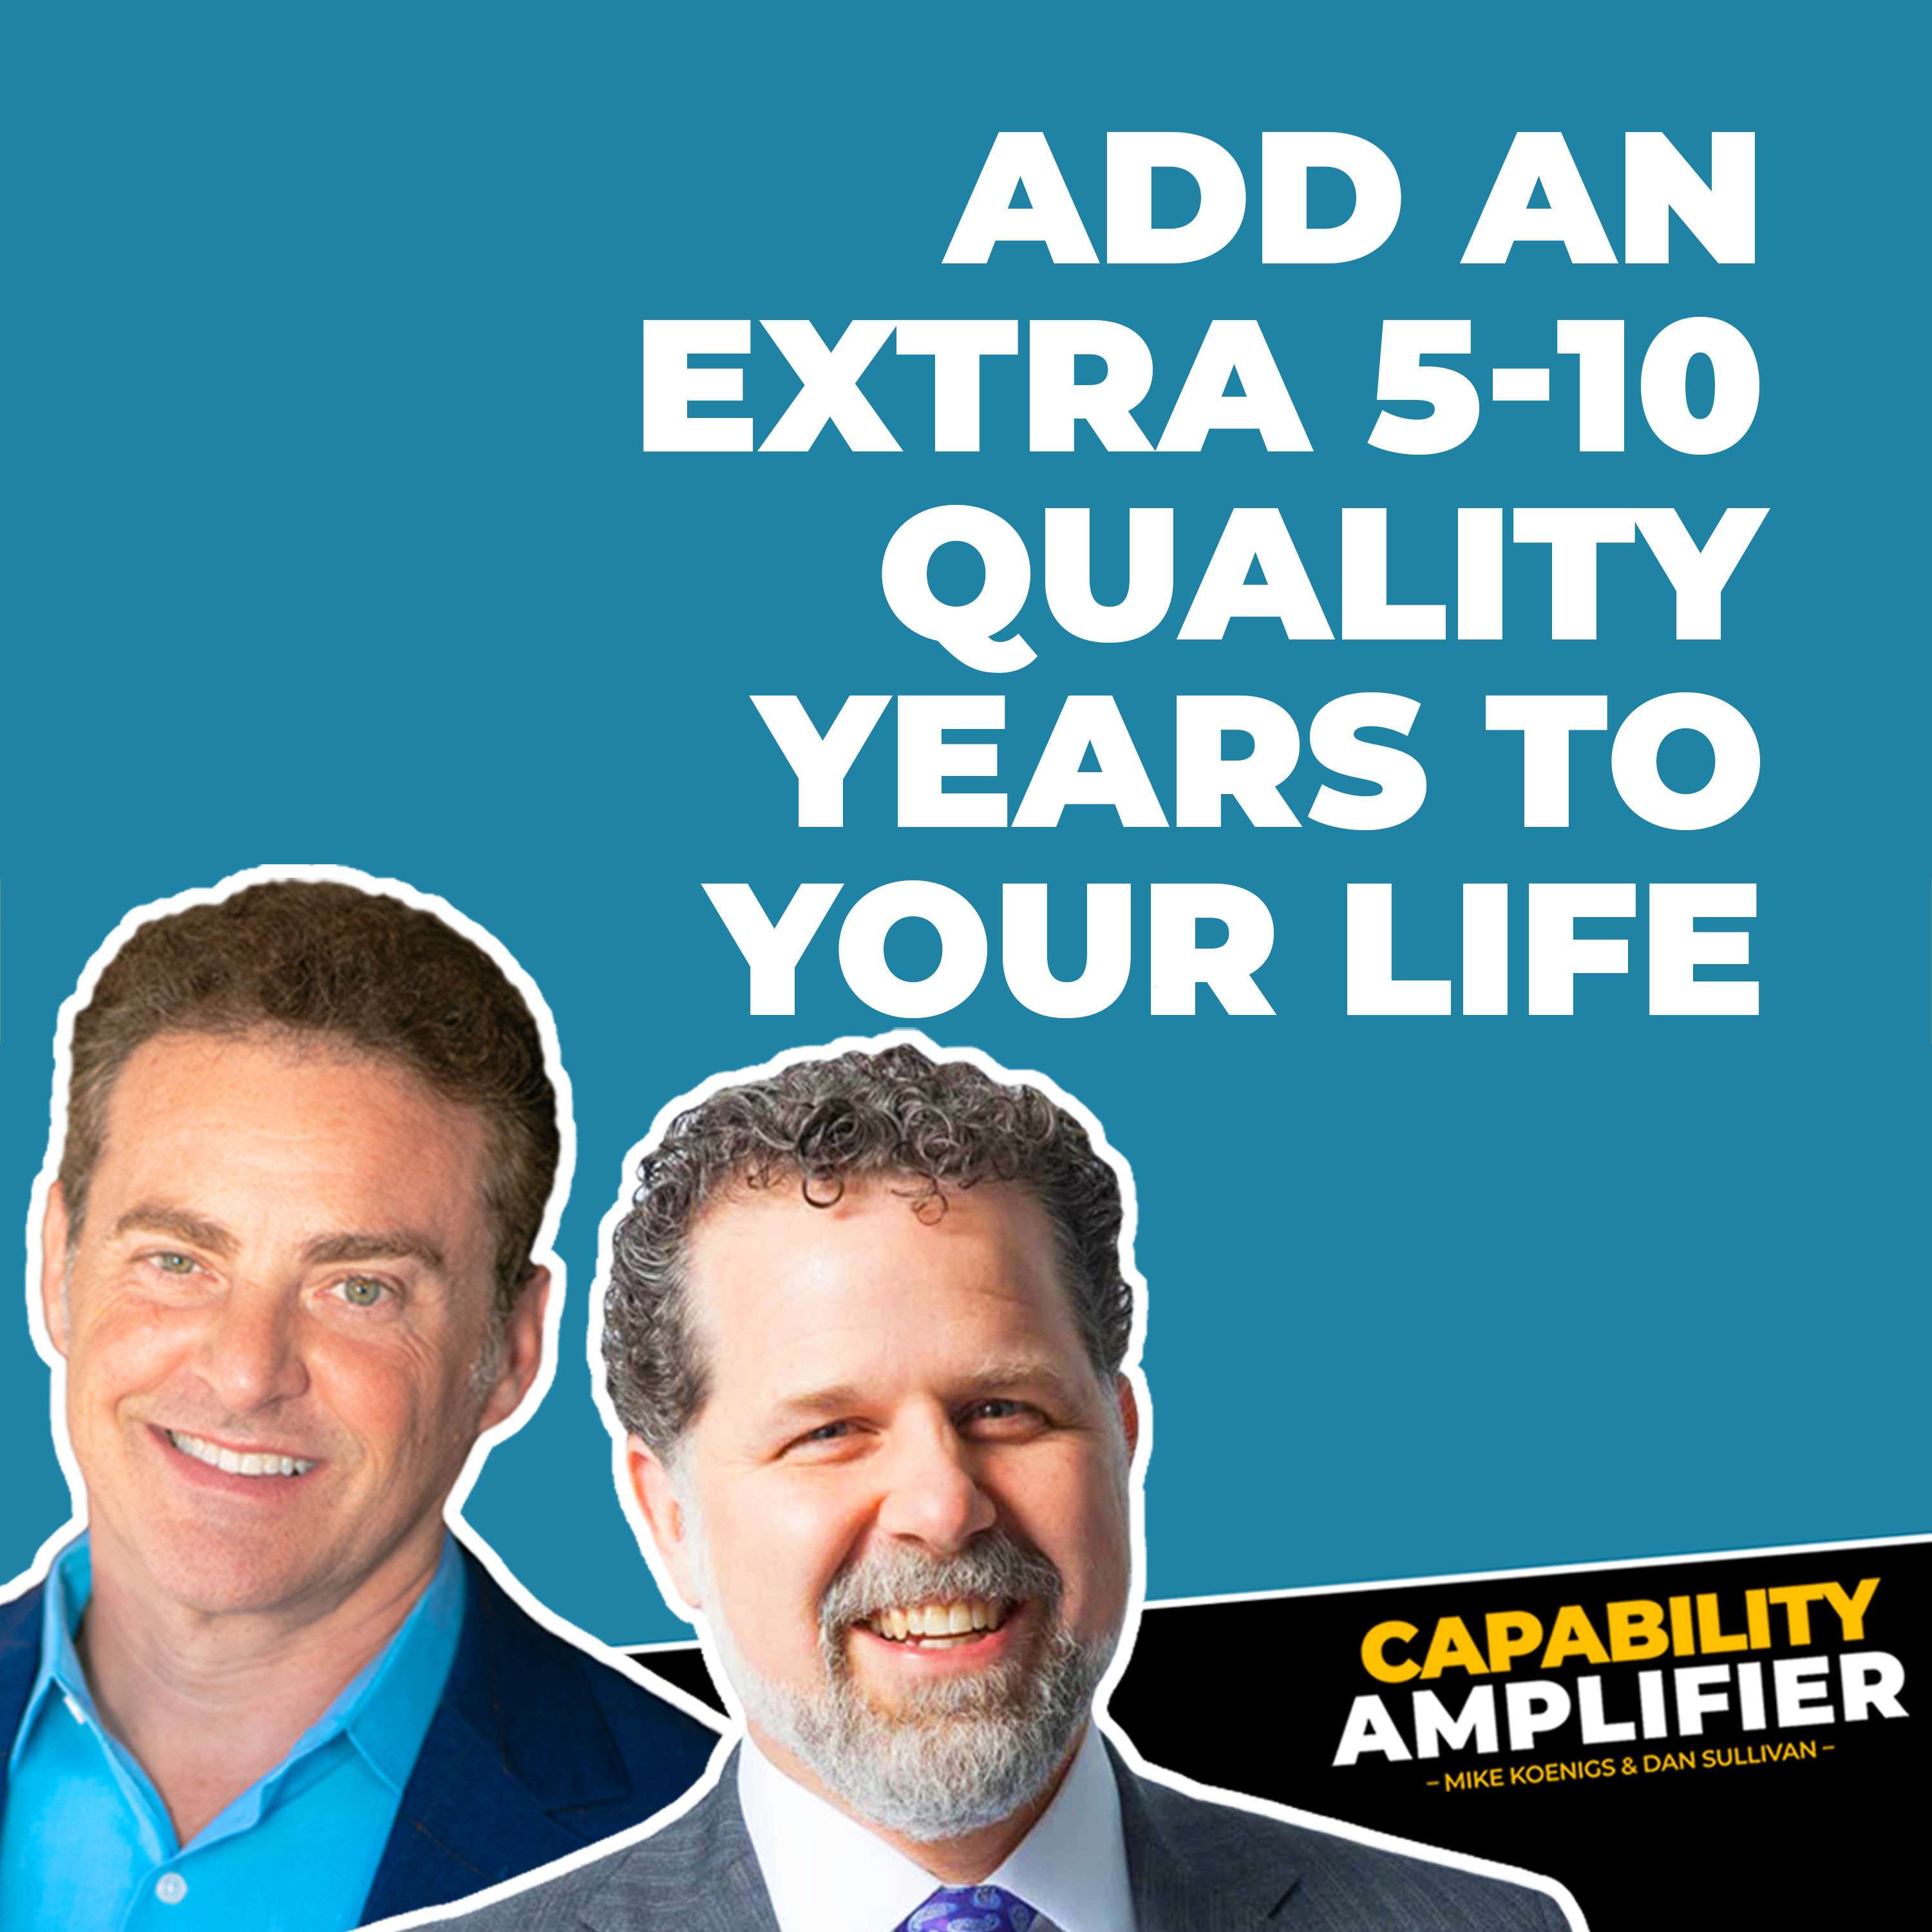 How to Add an Extra 5-10 Quality Years to Your Life